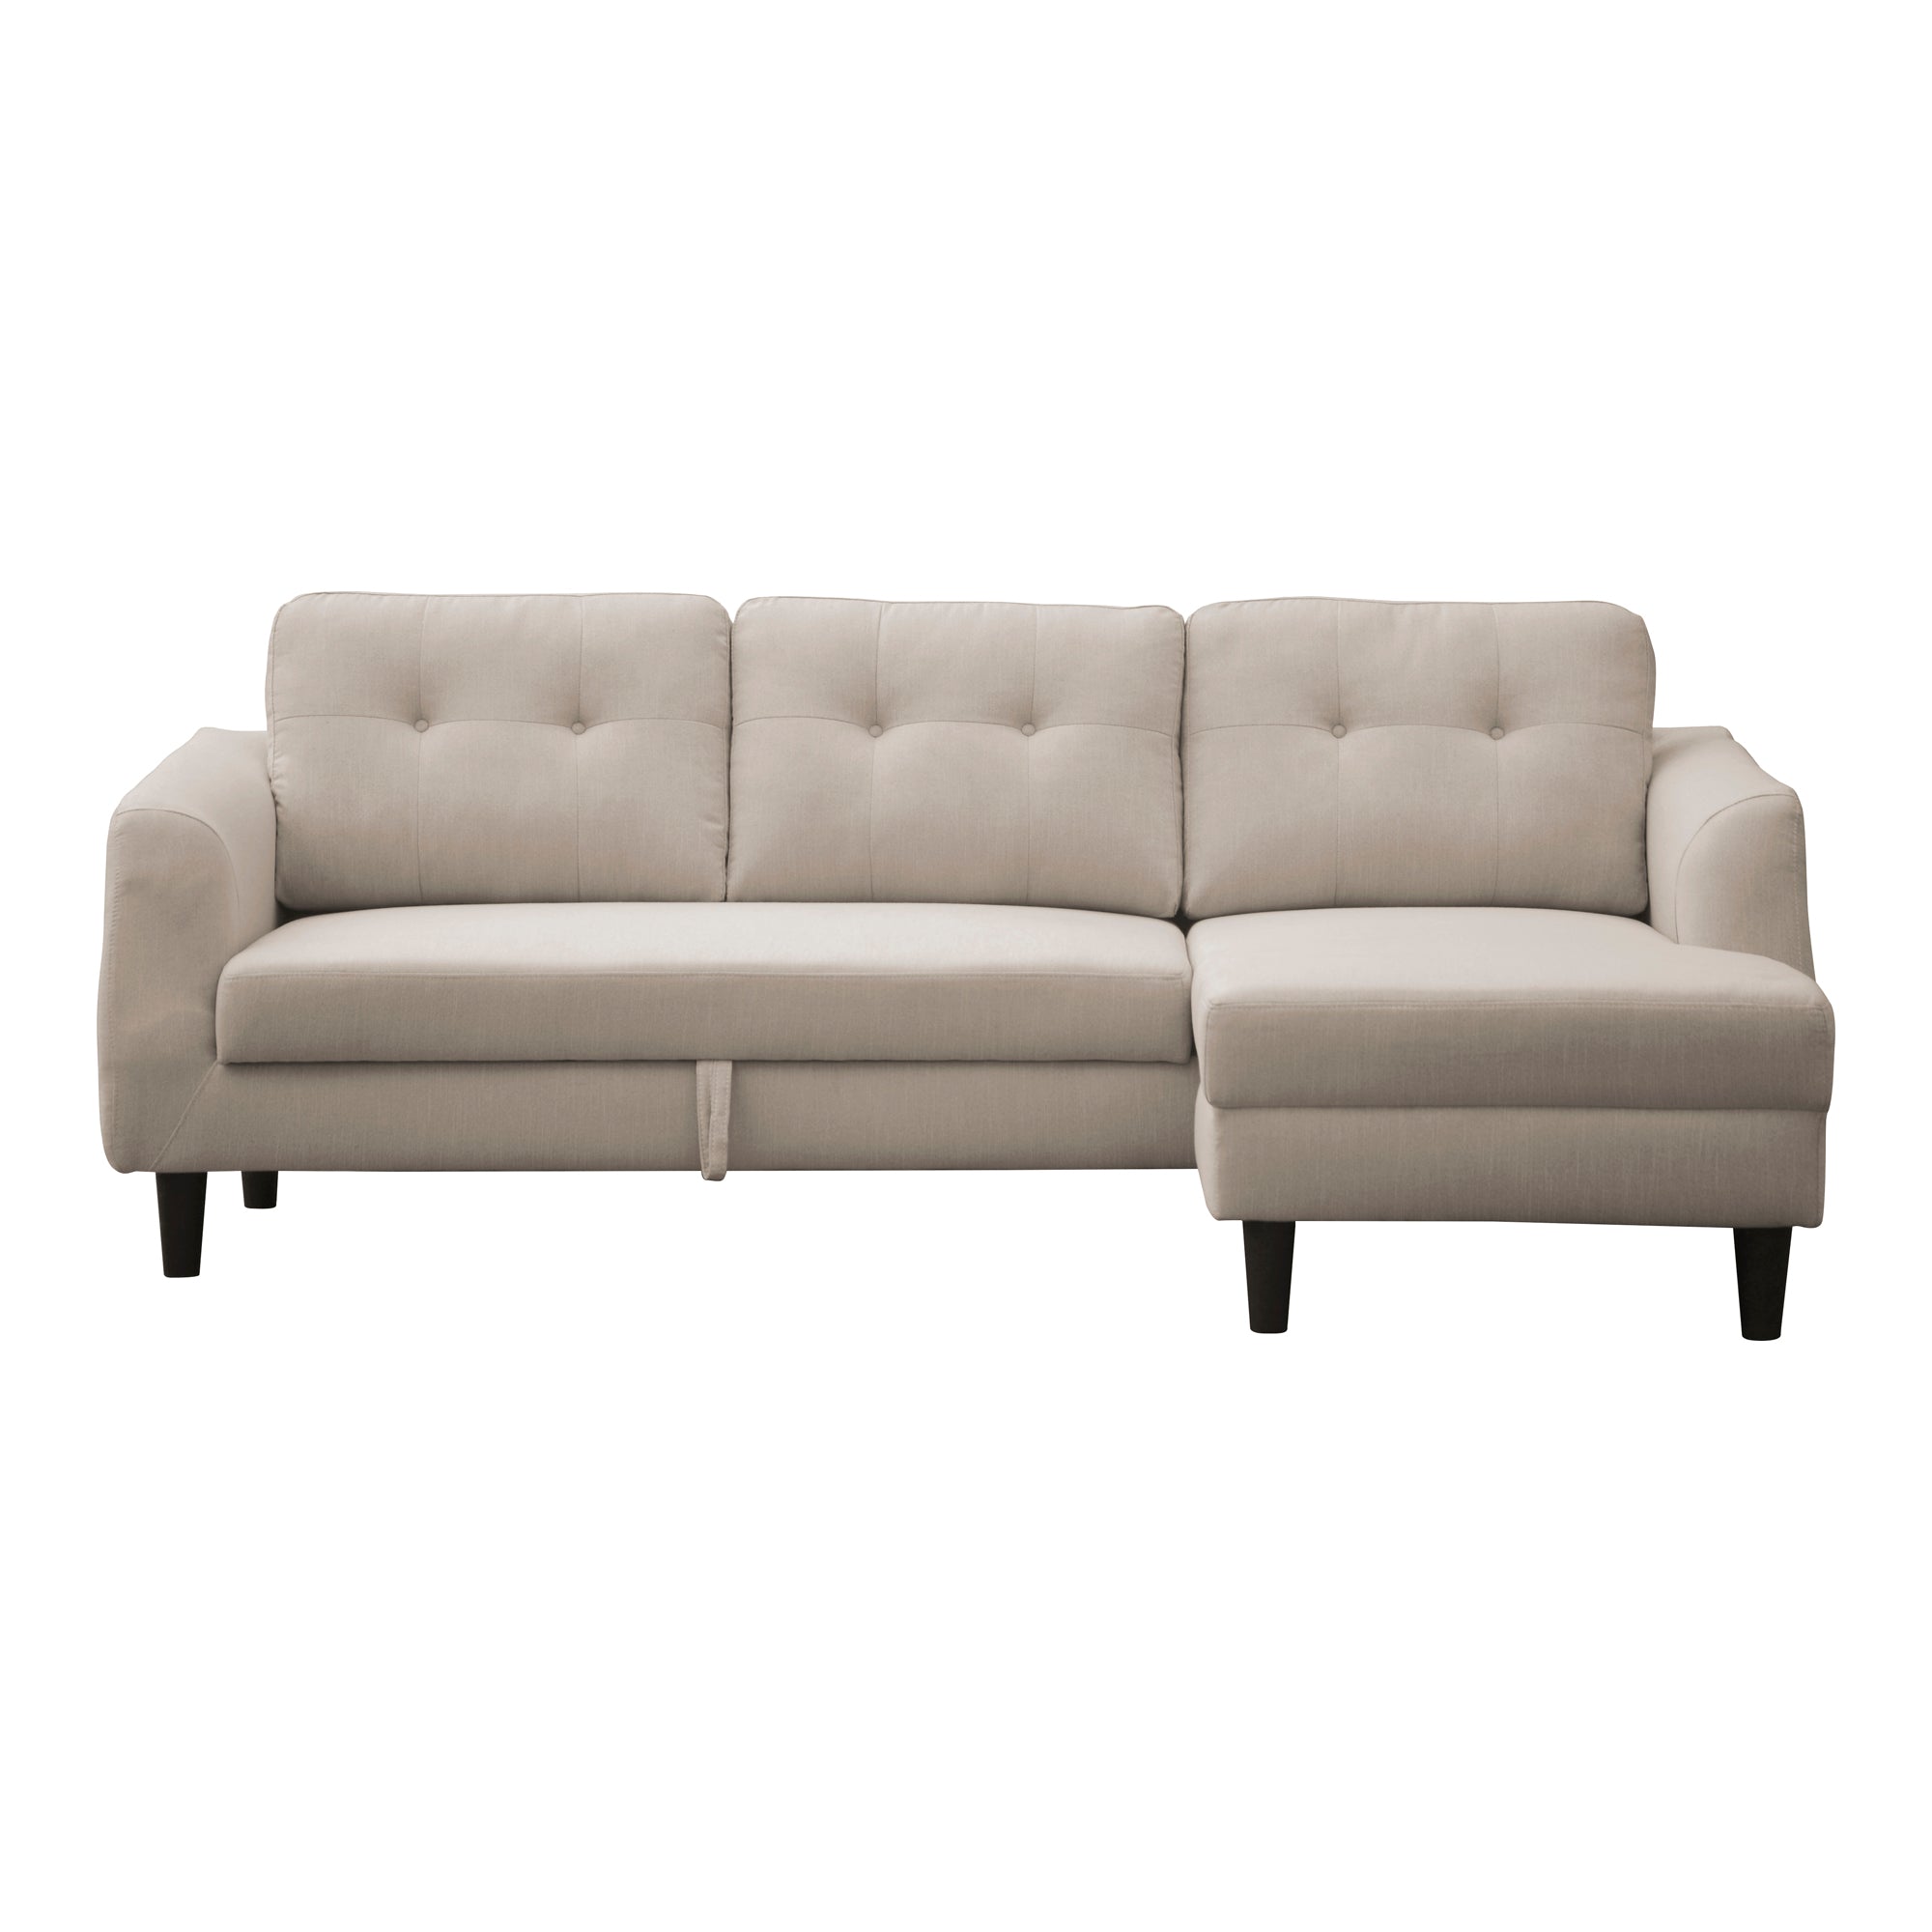 Belagio Sofa Bed With Right-Facing Chaise